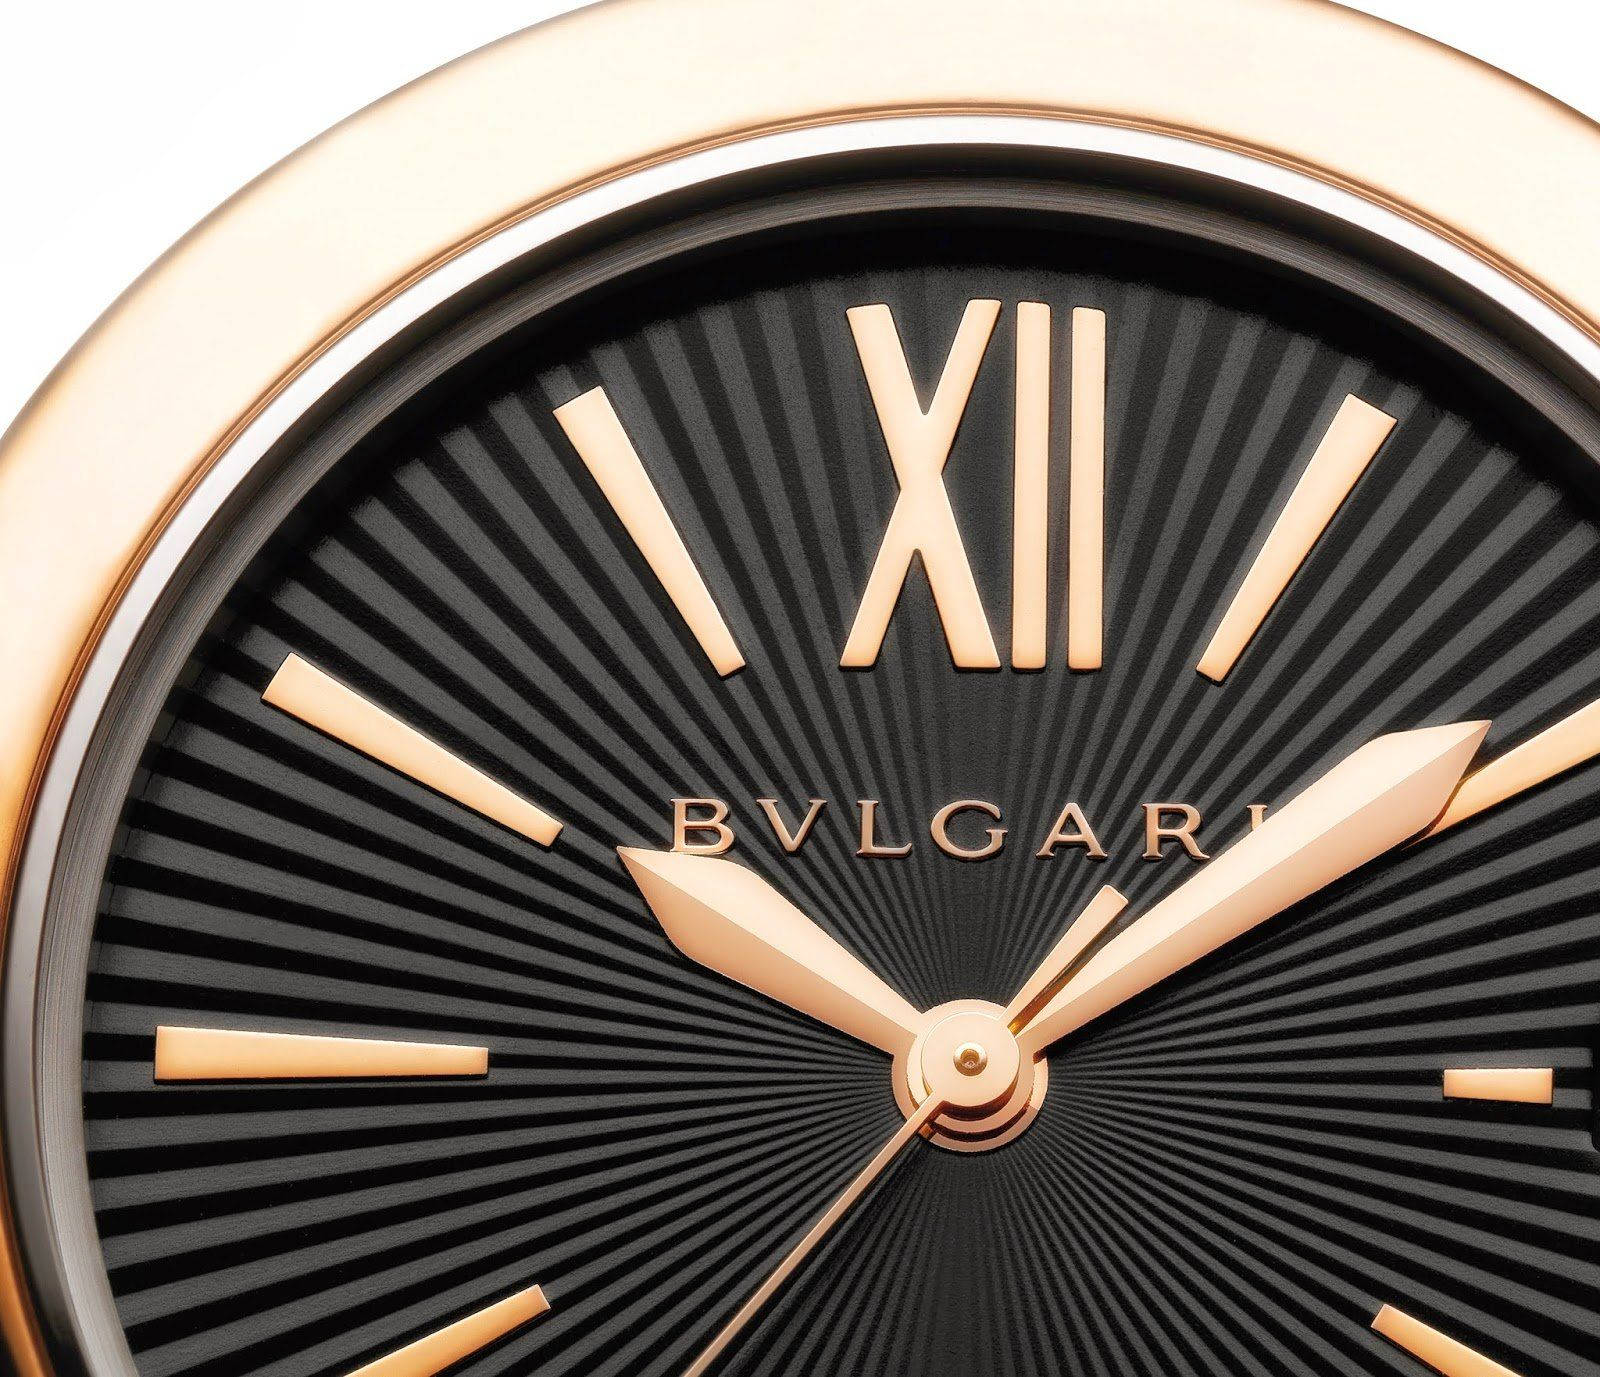 Caption: Luxury Precision Crafted - A Close-up Showcase of Bvlgari Watch Wallpaper